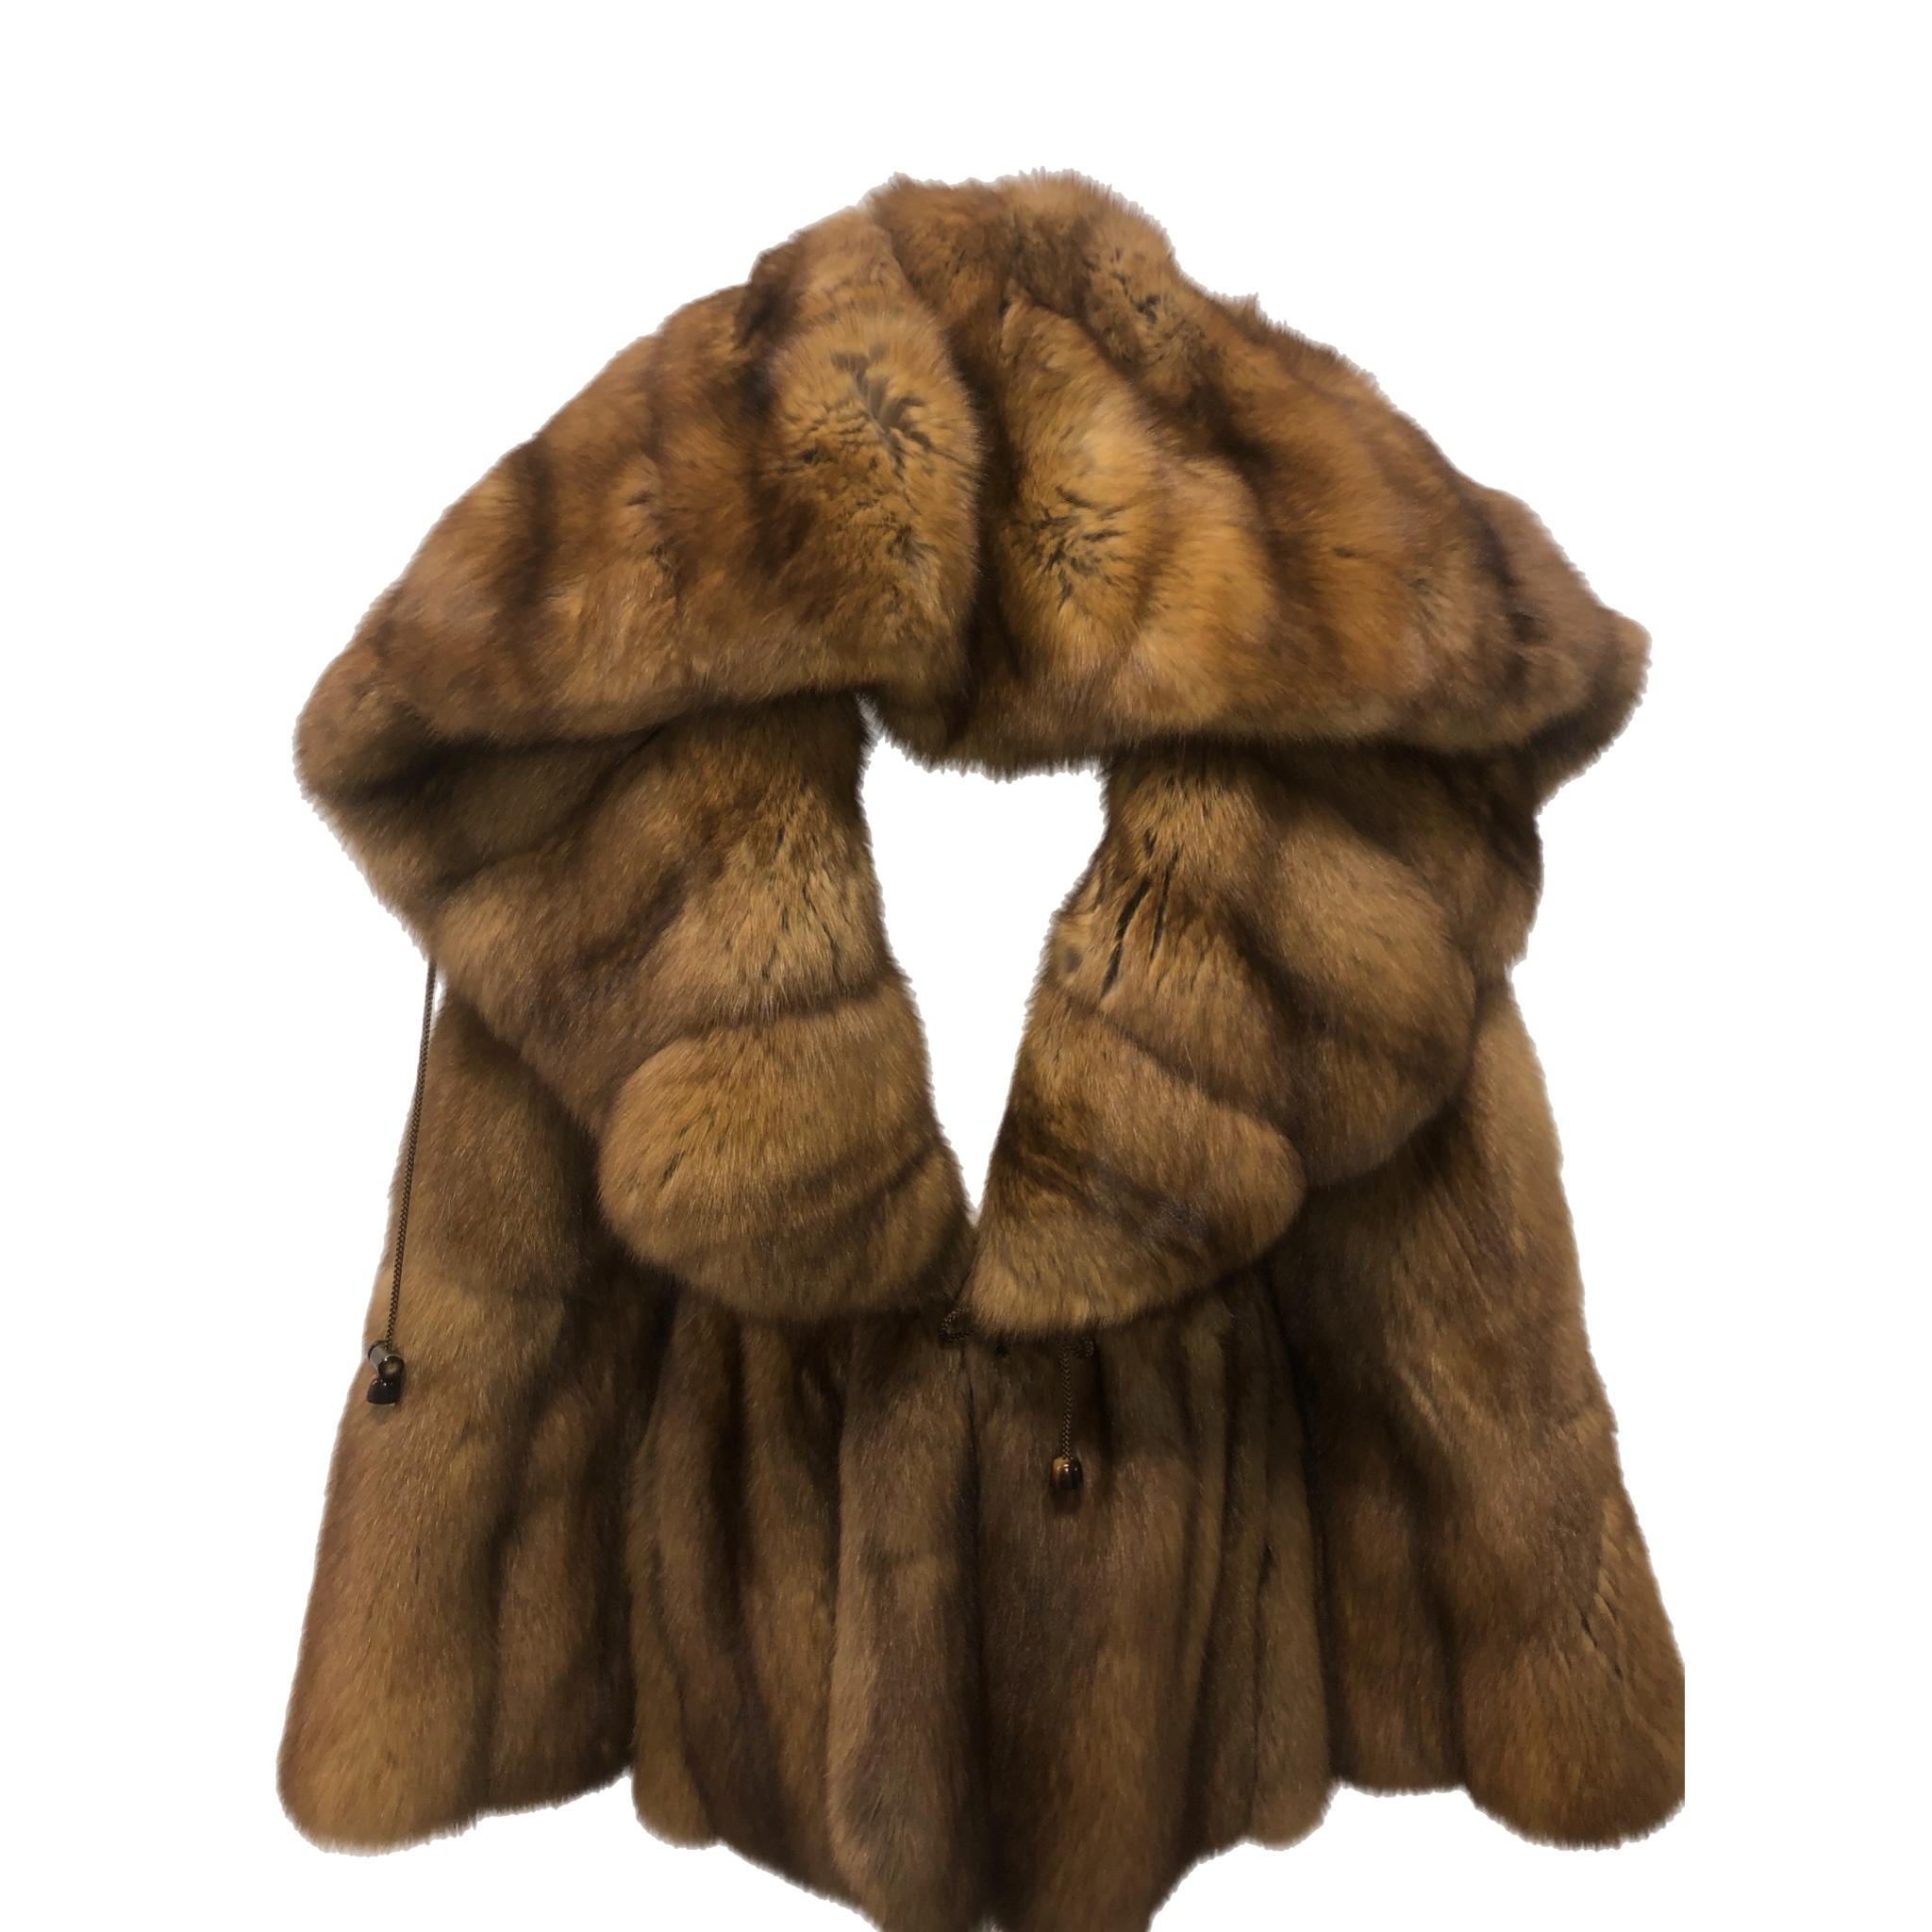 Bisang Russian Sable fur coat size 14-16 tags 65000$ For Sale 3